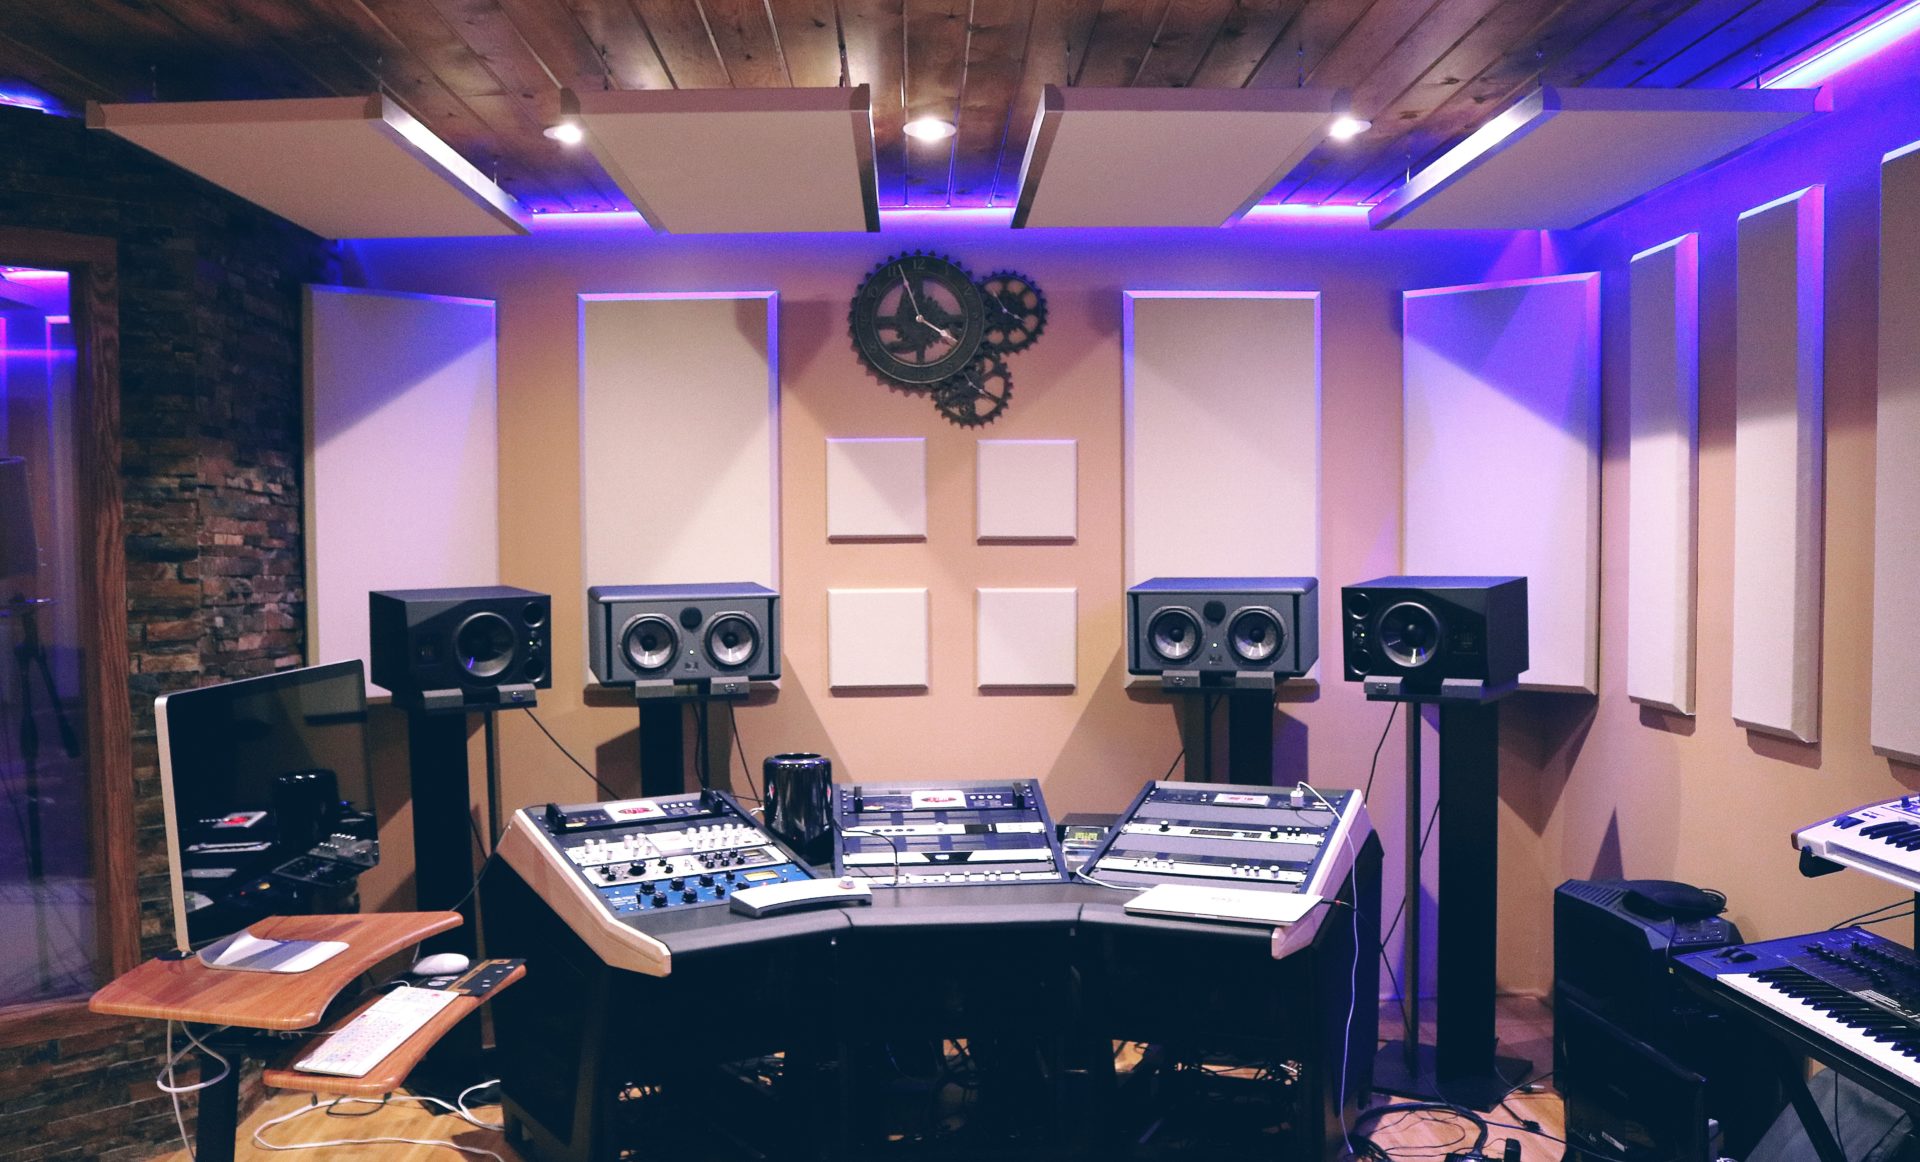 A recording studio control room with wall treatments and purple overhead lighting